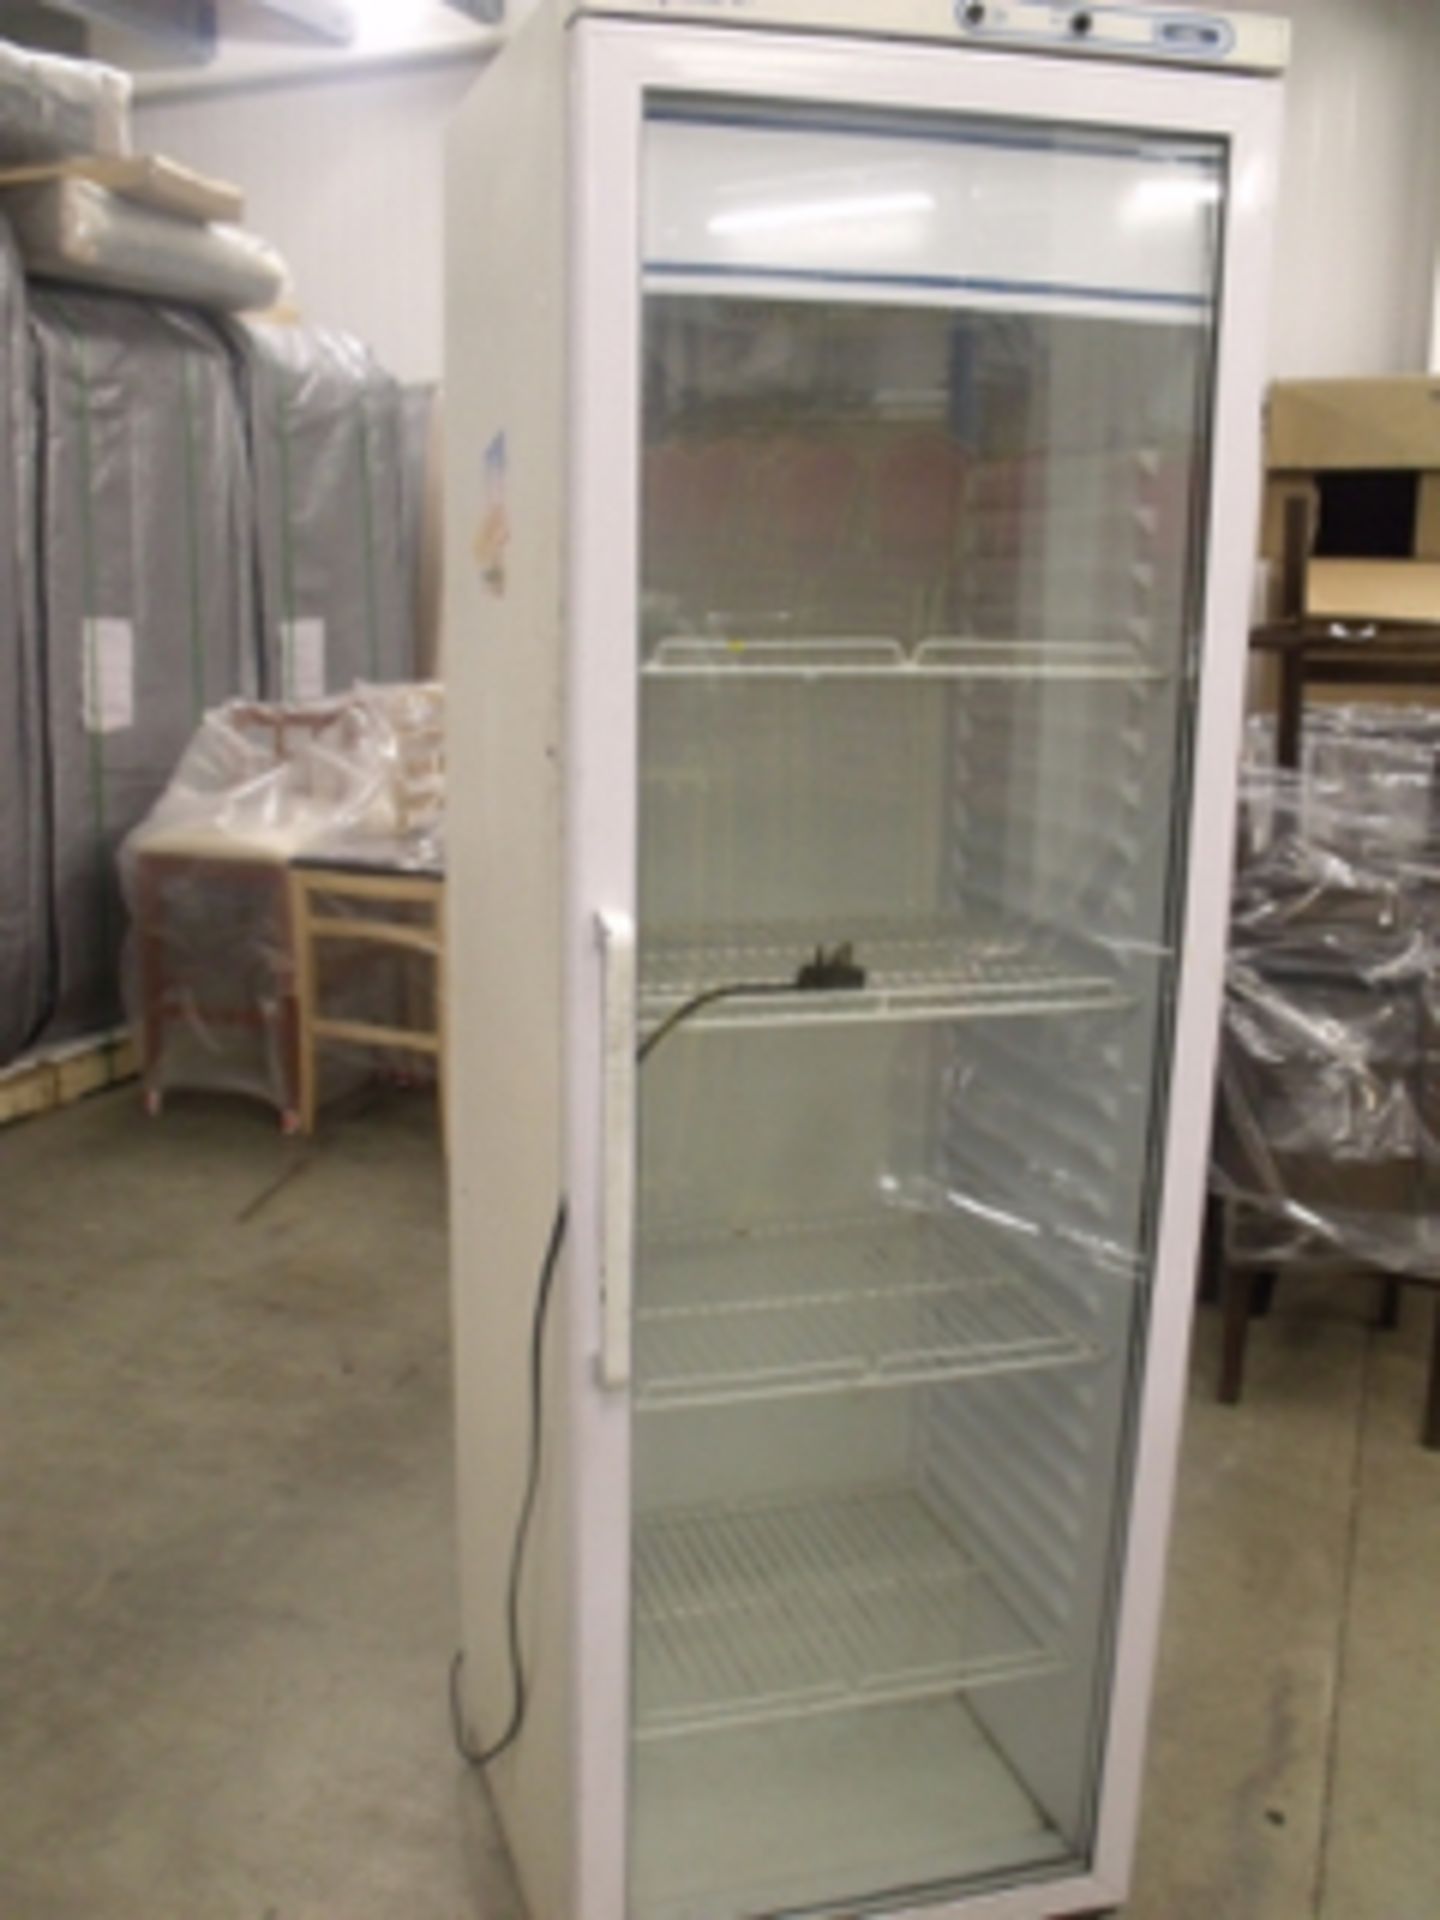 Upright glass fronted refrigerator , 240v, size 600mm wide x 1860mm high